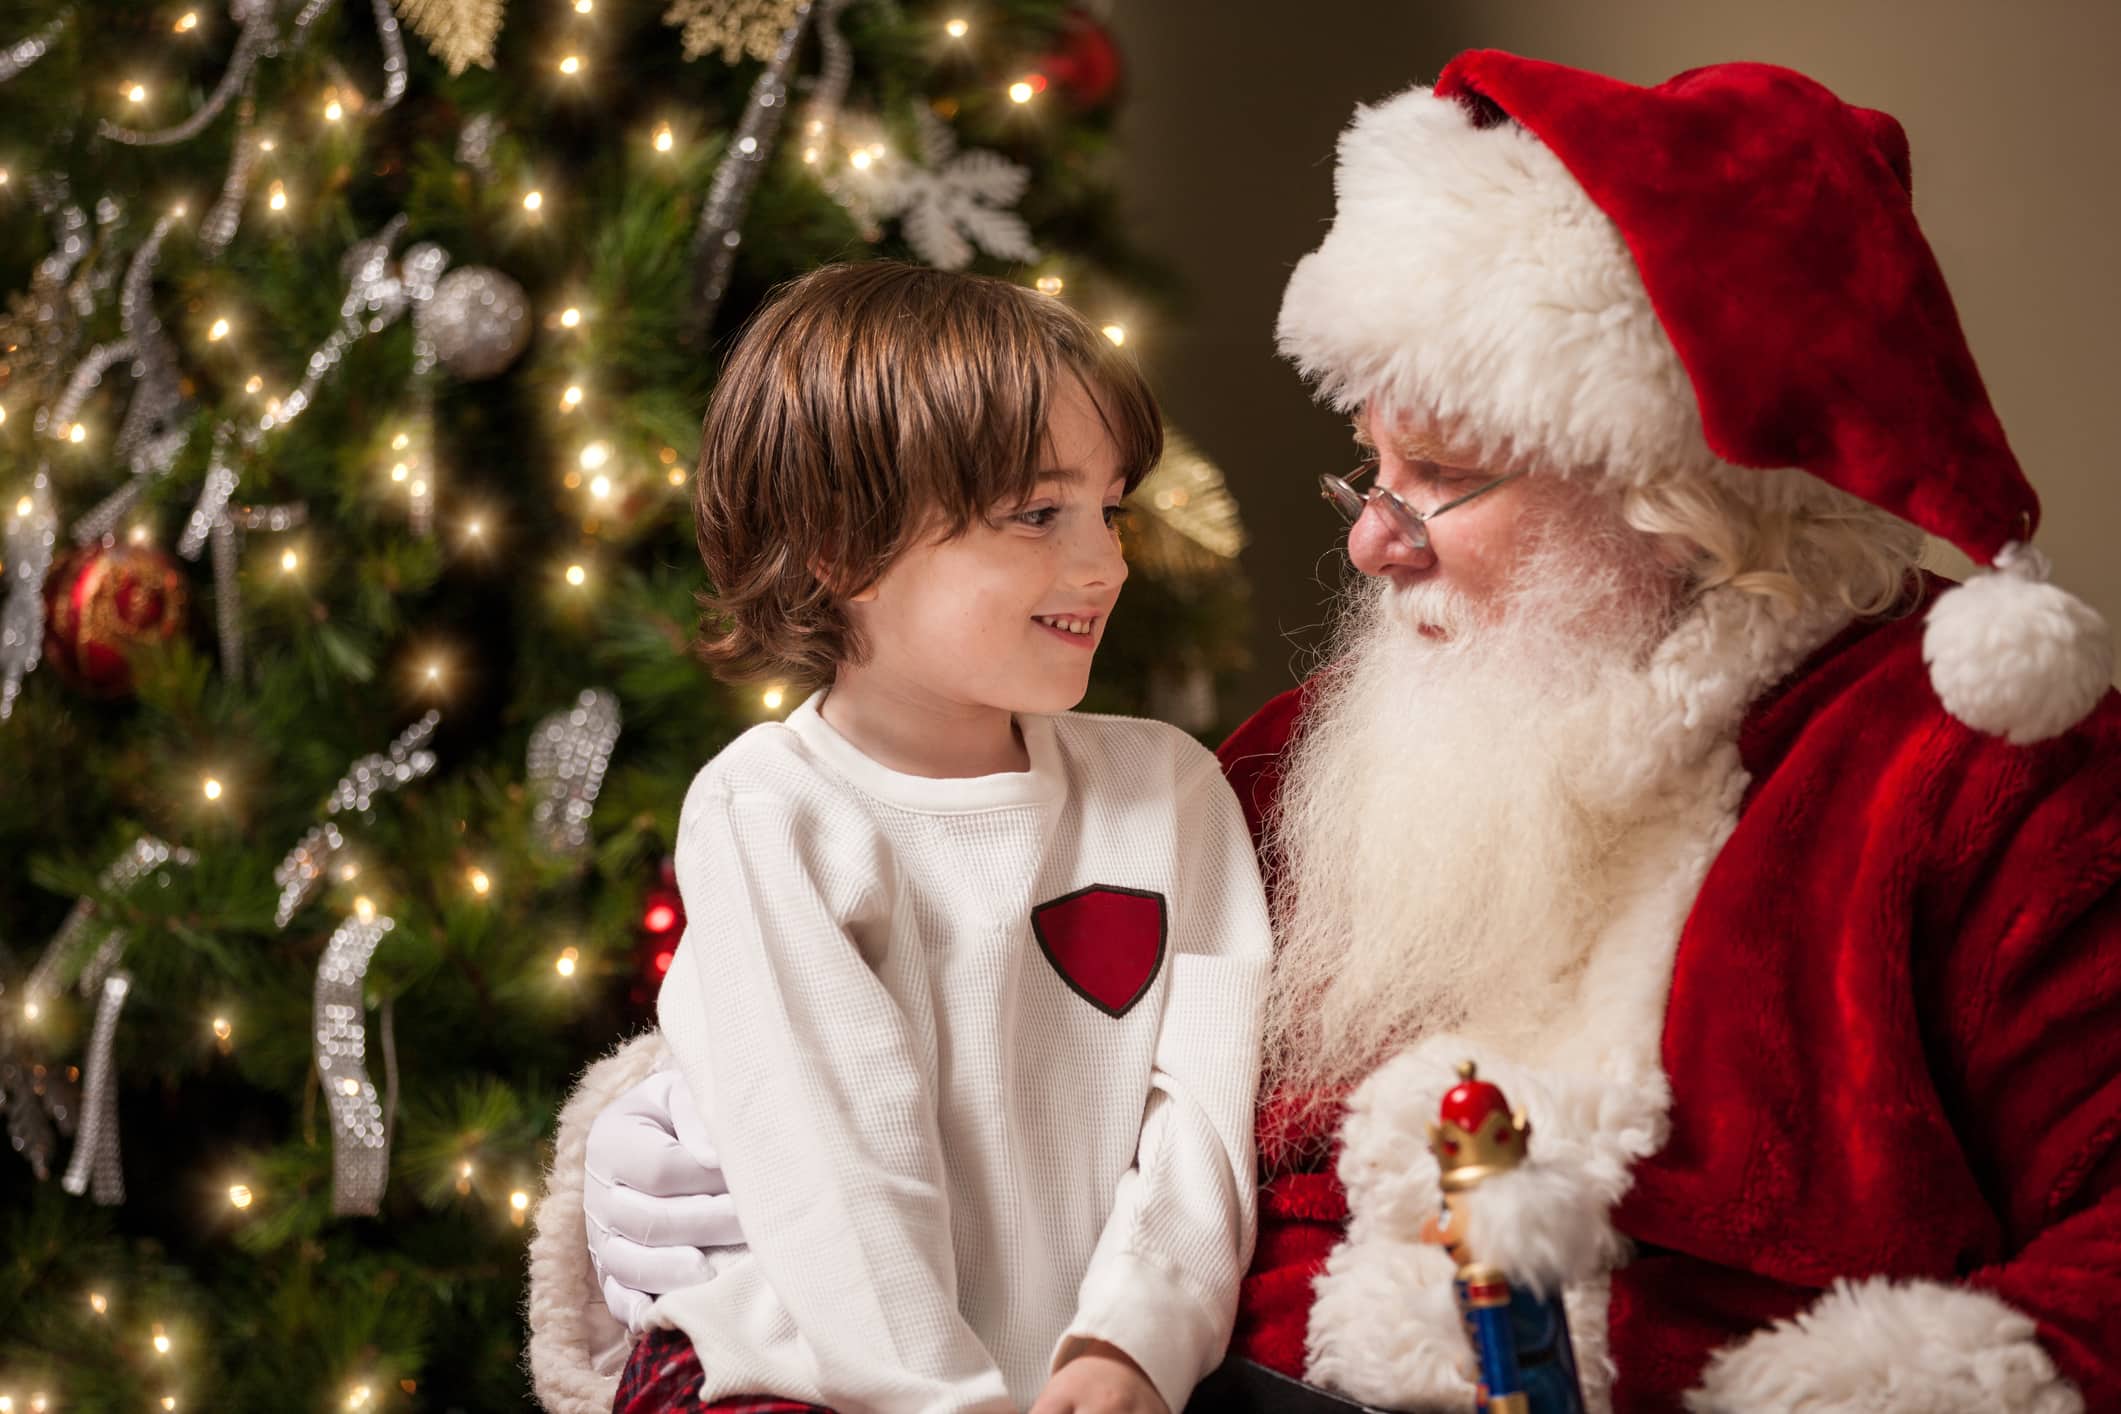 A young boy sits on Santa Claus' lap by a decorated Christmas tree in his living room. Santa has a real beard and the child looks at him with wonder, awe, and a hint of excitement.